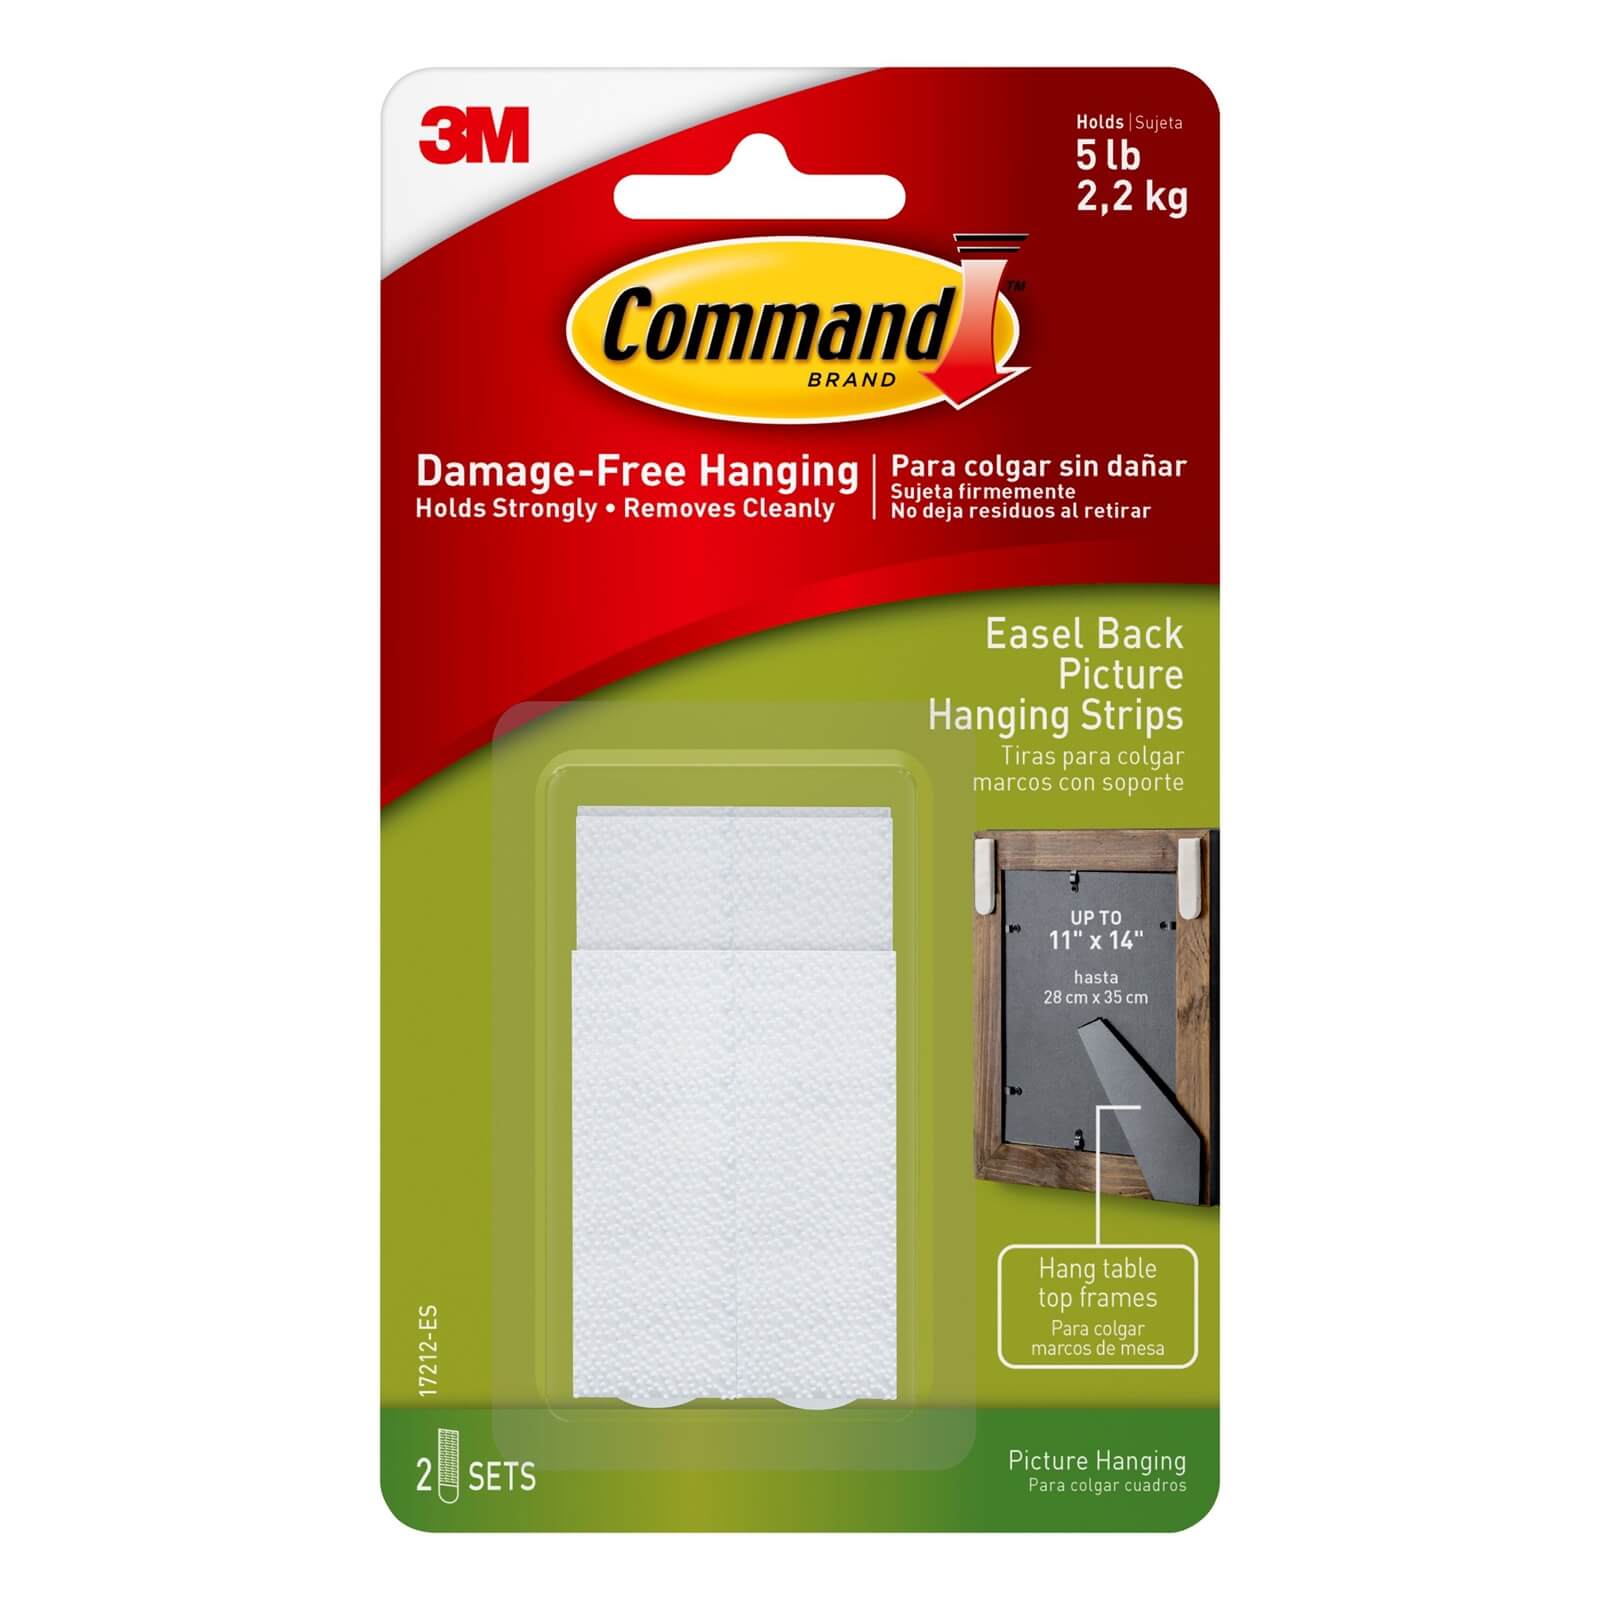 Command Medium Easel Back Picture Hanging Strips